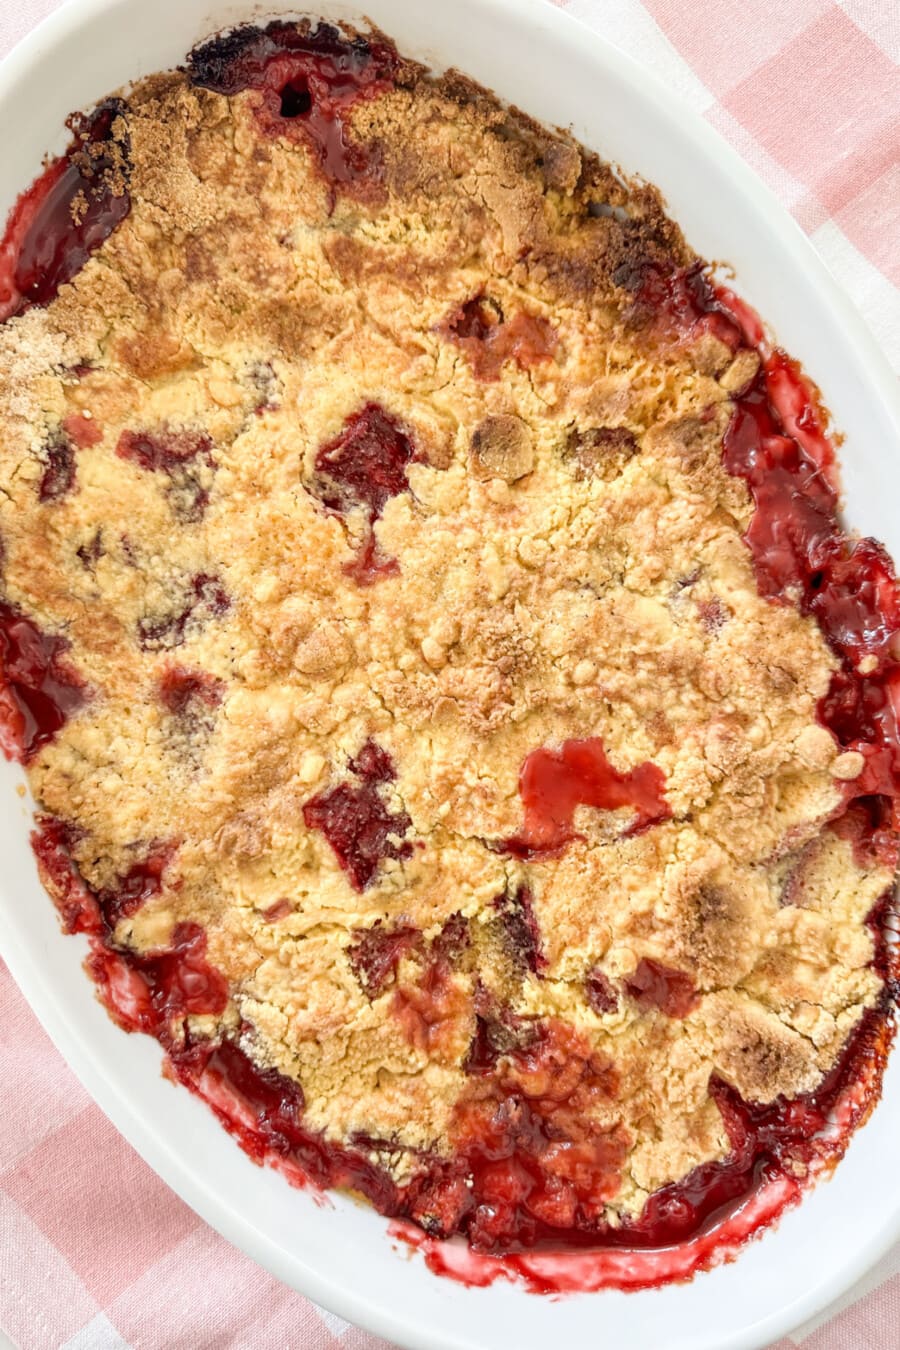 Easy Strawberry Cobbler From A Box Mix